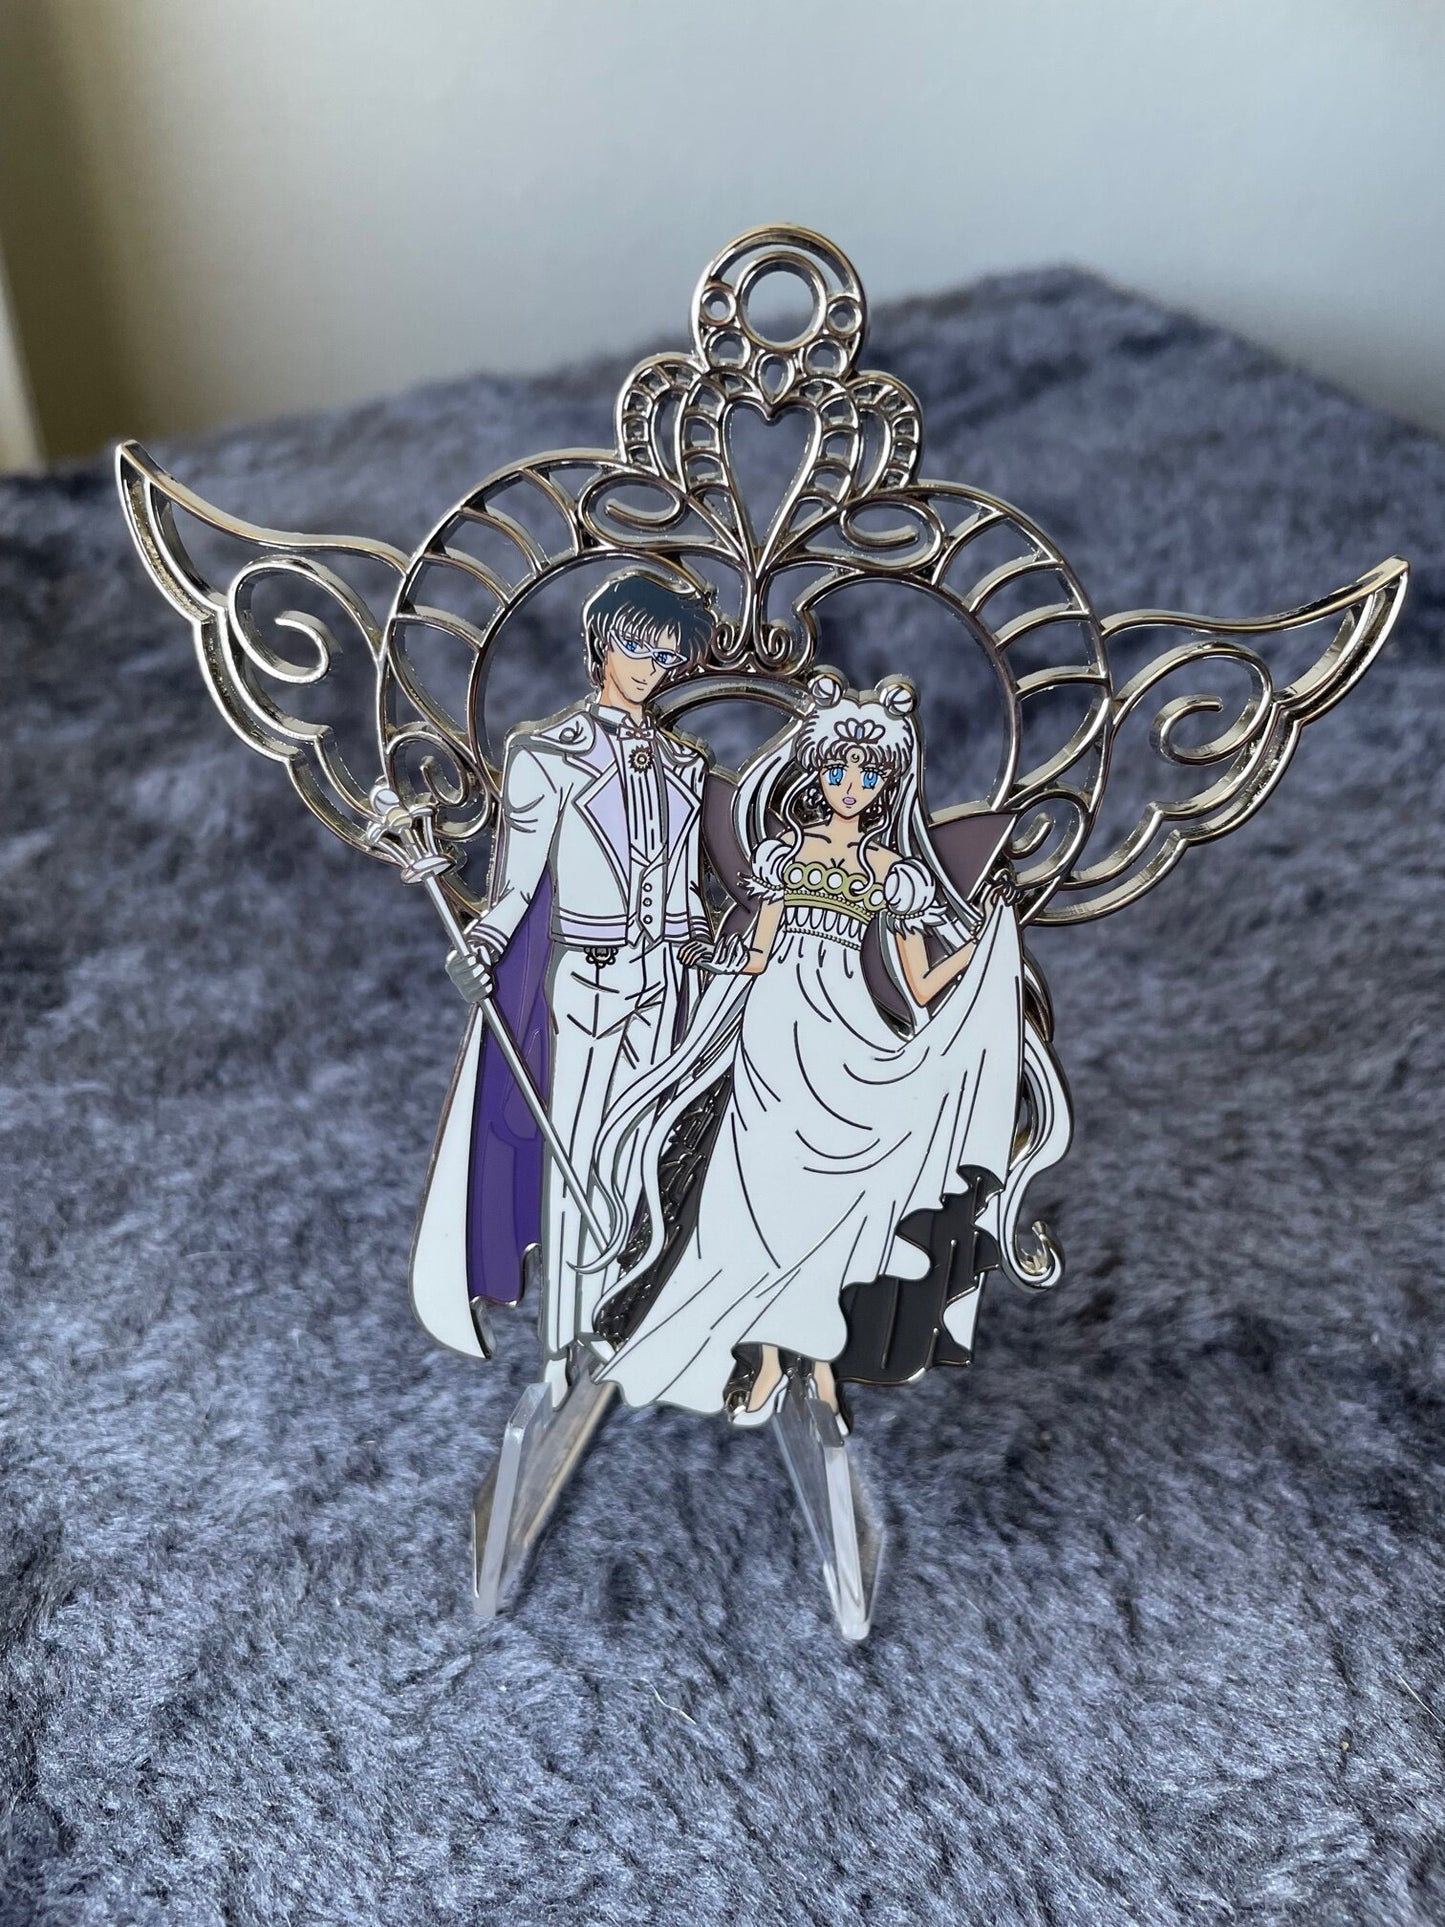 Framework: Queen Serenity and King Endymion